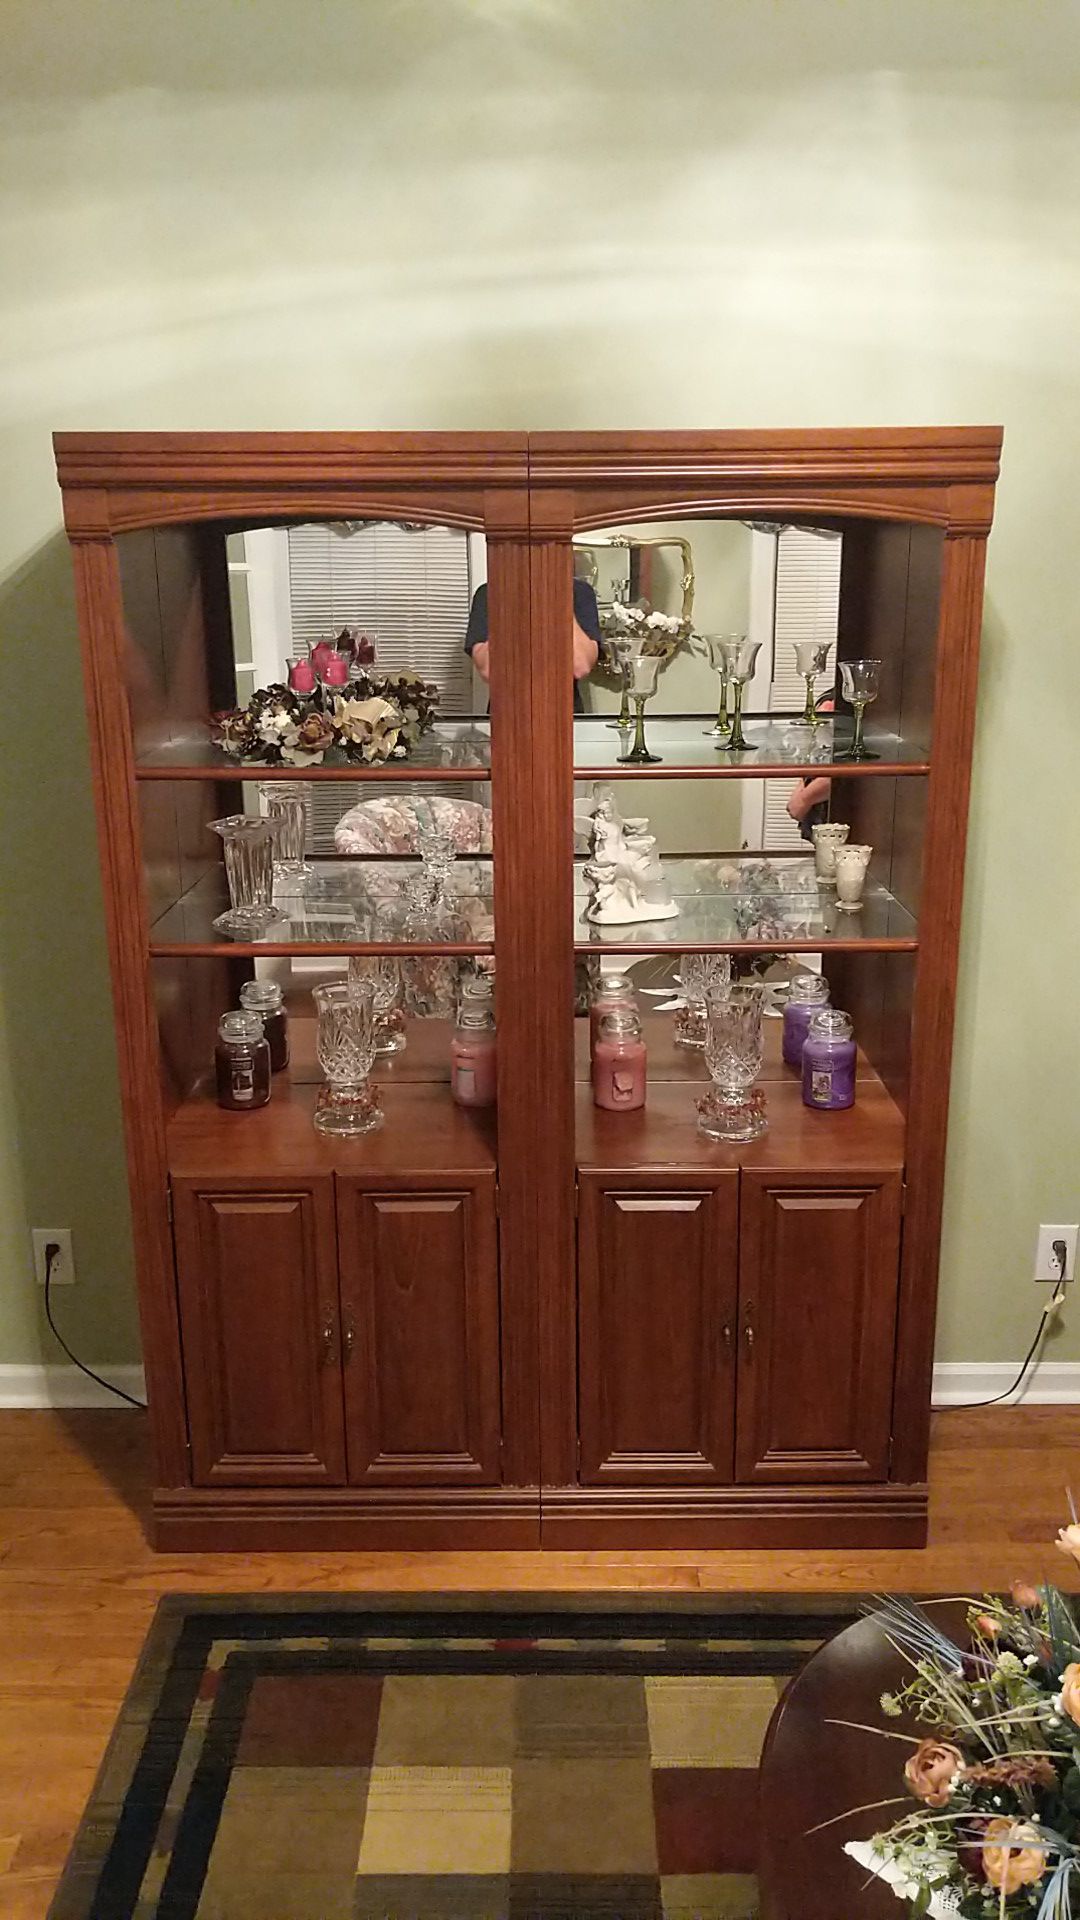 Two lighted cabinets with shelves